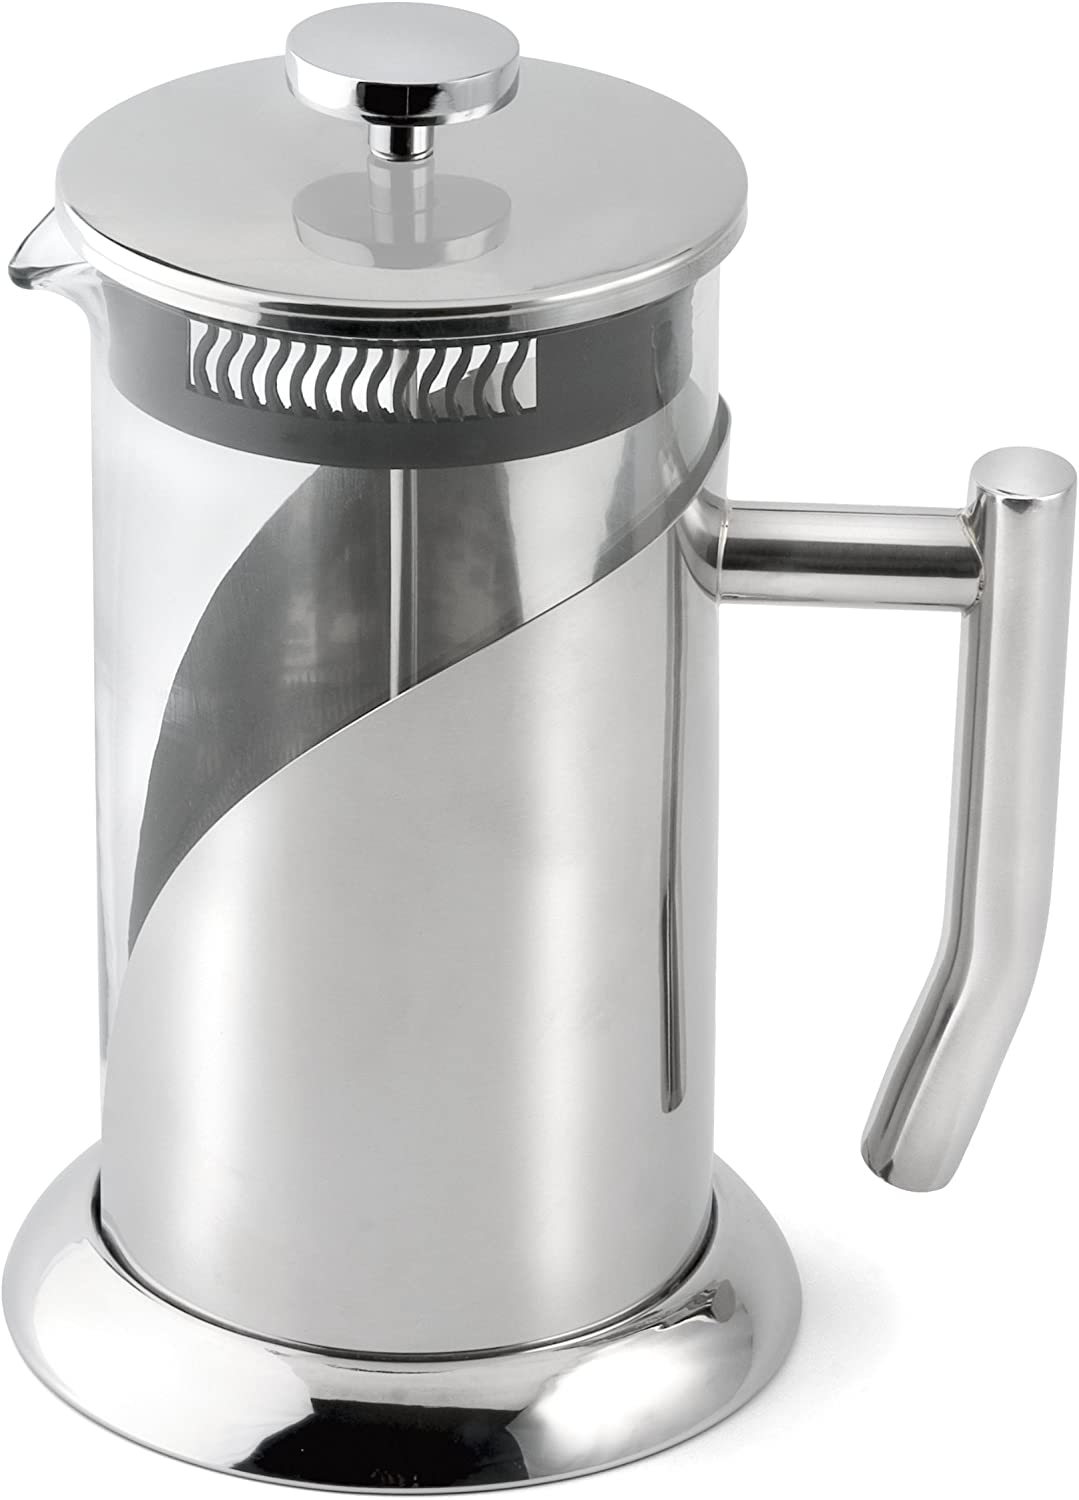 Weis 18180 Cafetiere Large 800 ml Glass / Stainless Steel